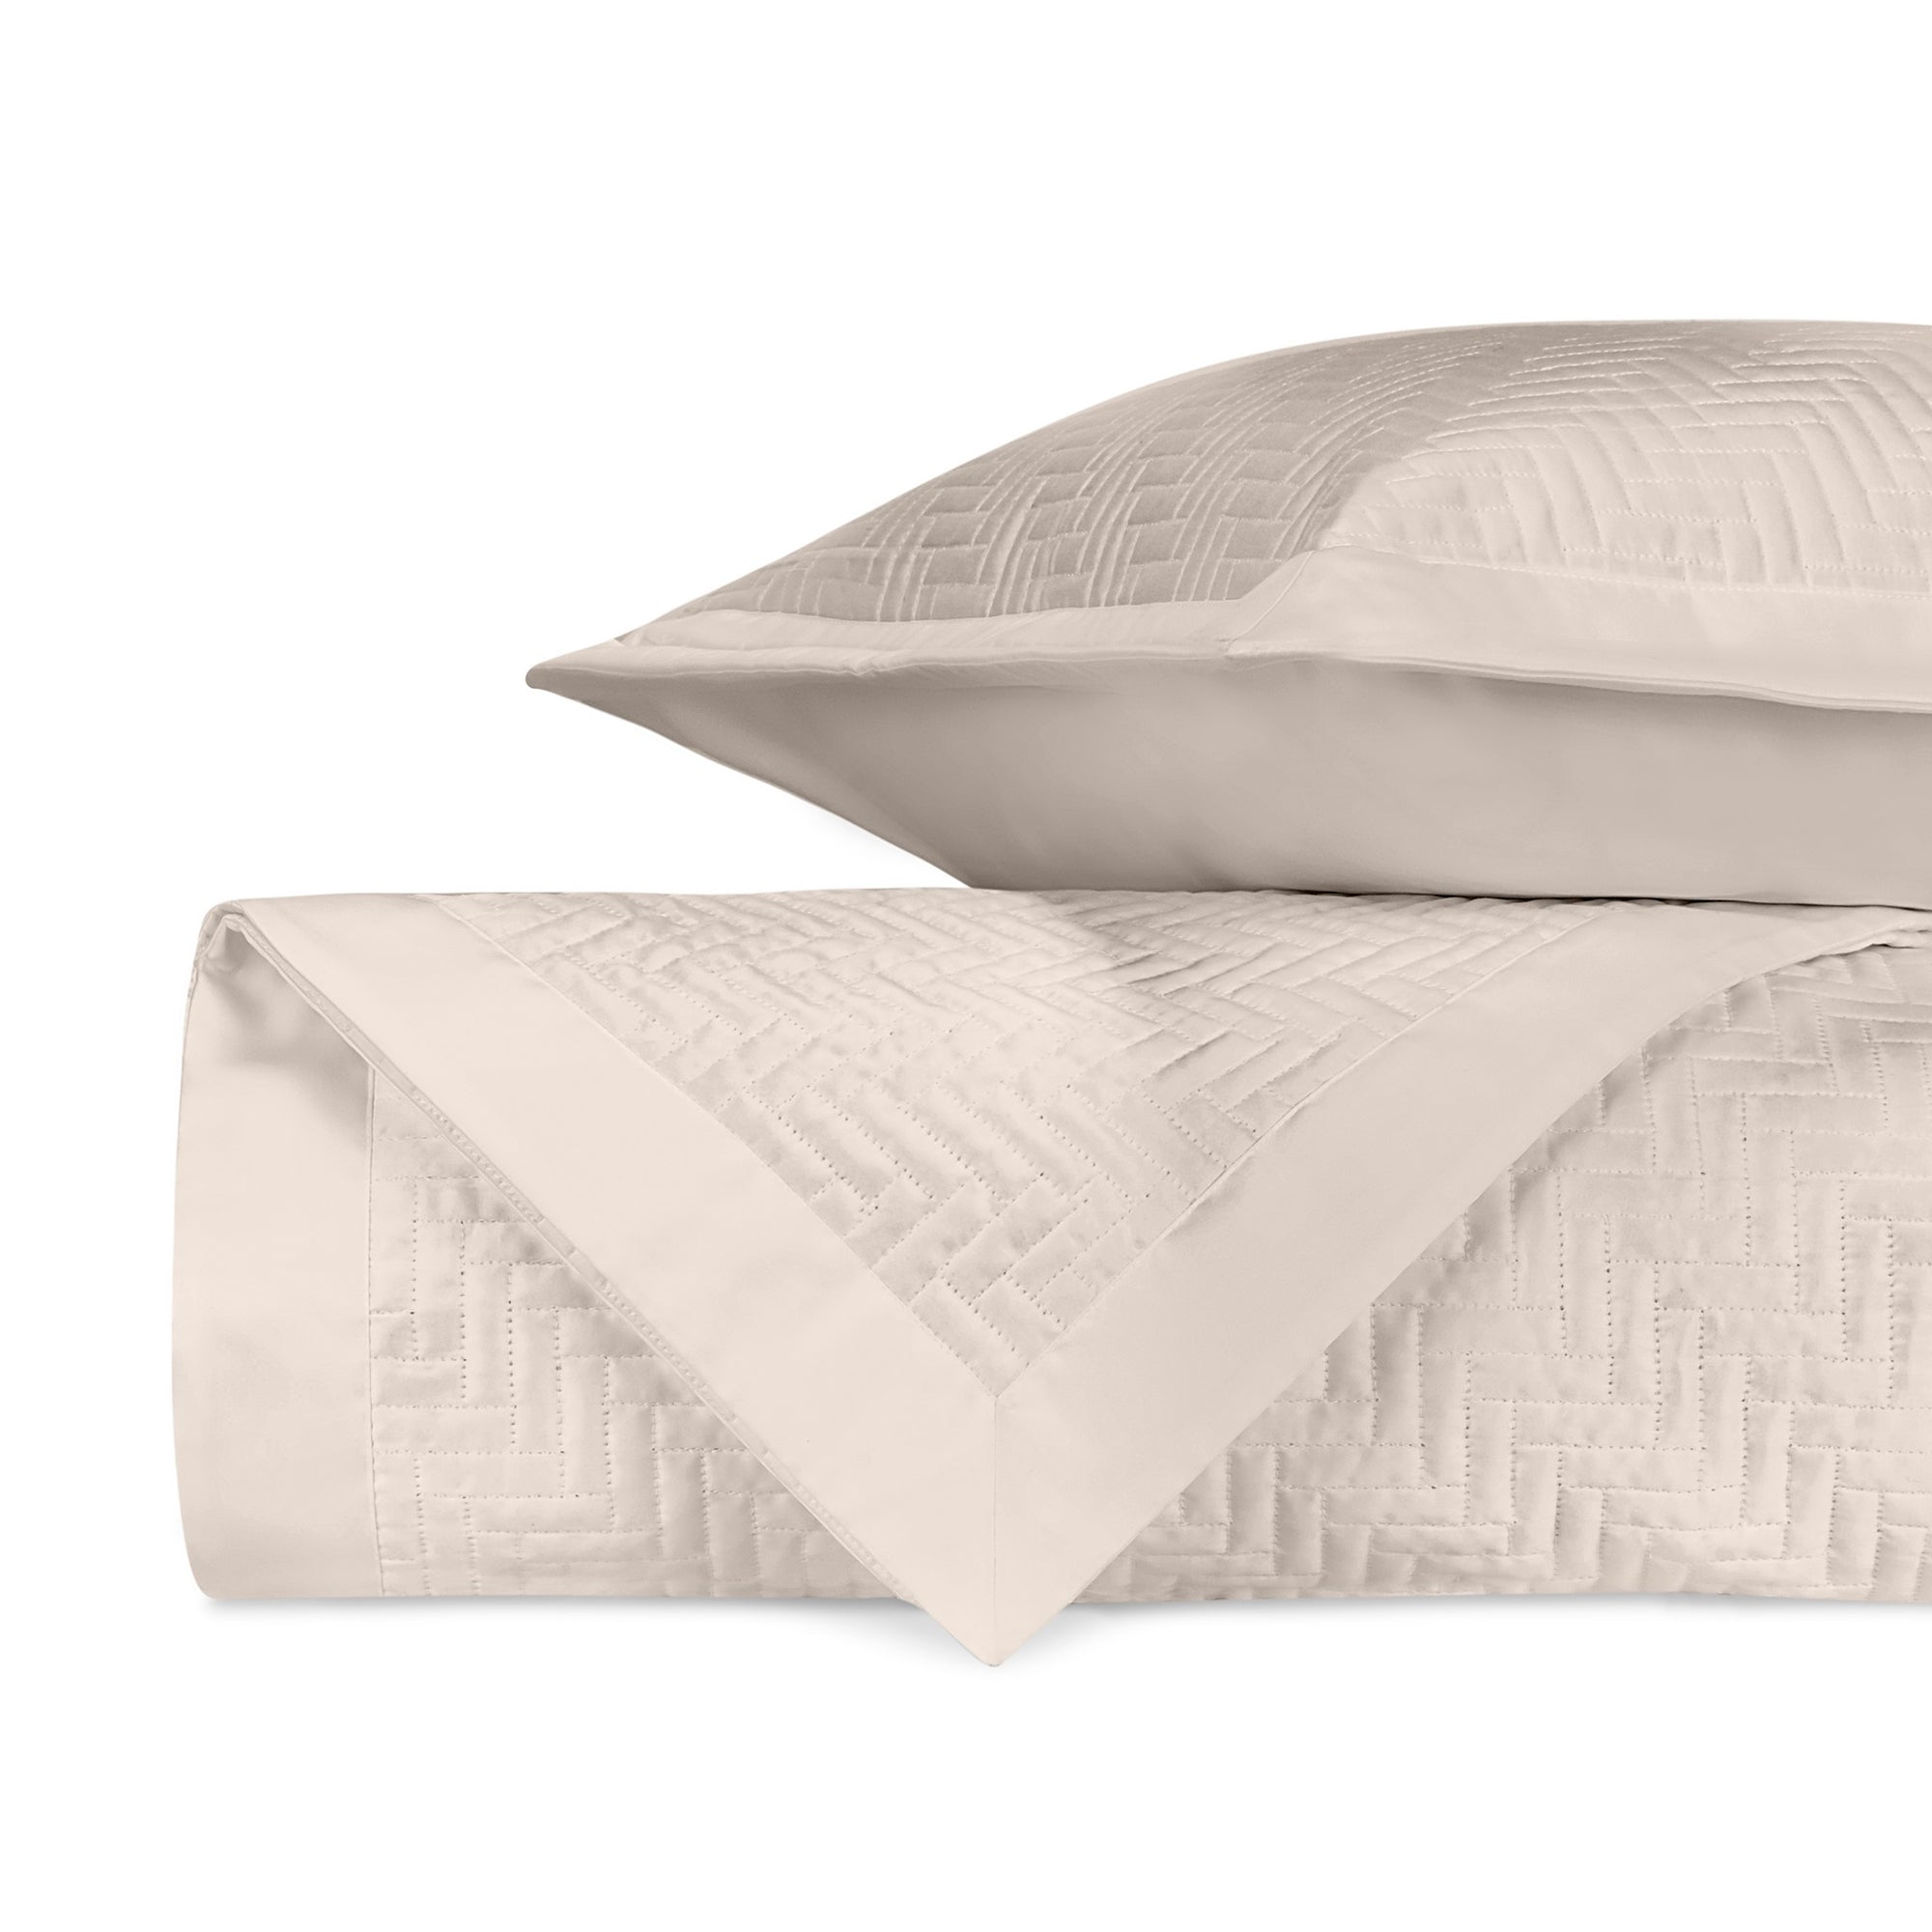 Stack Image of Home Treasures Baxter Royal Sateen Quilted Bedding in Color Ecru